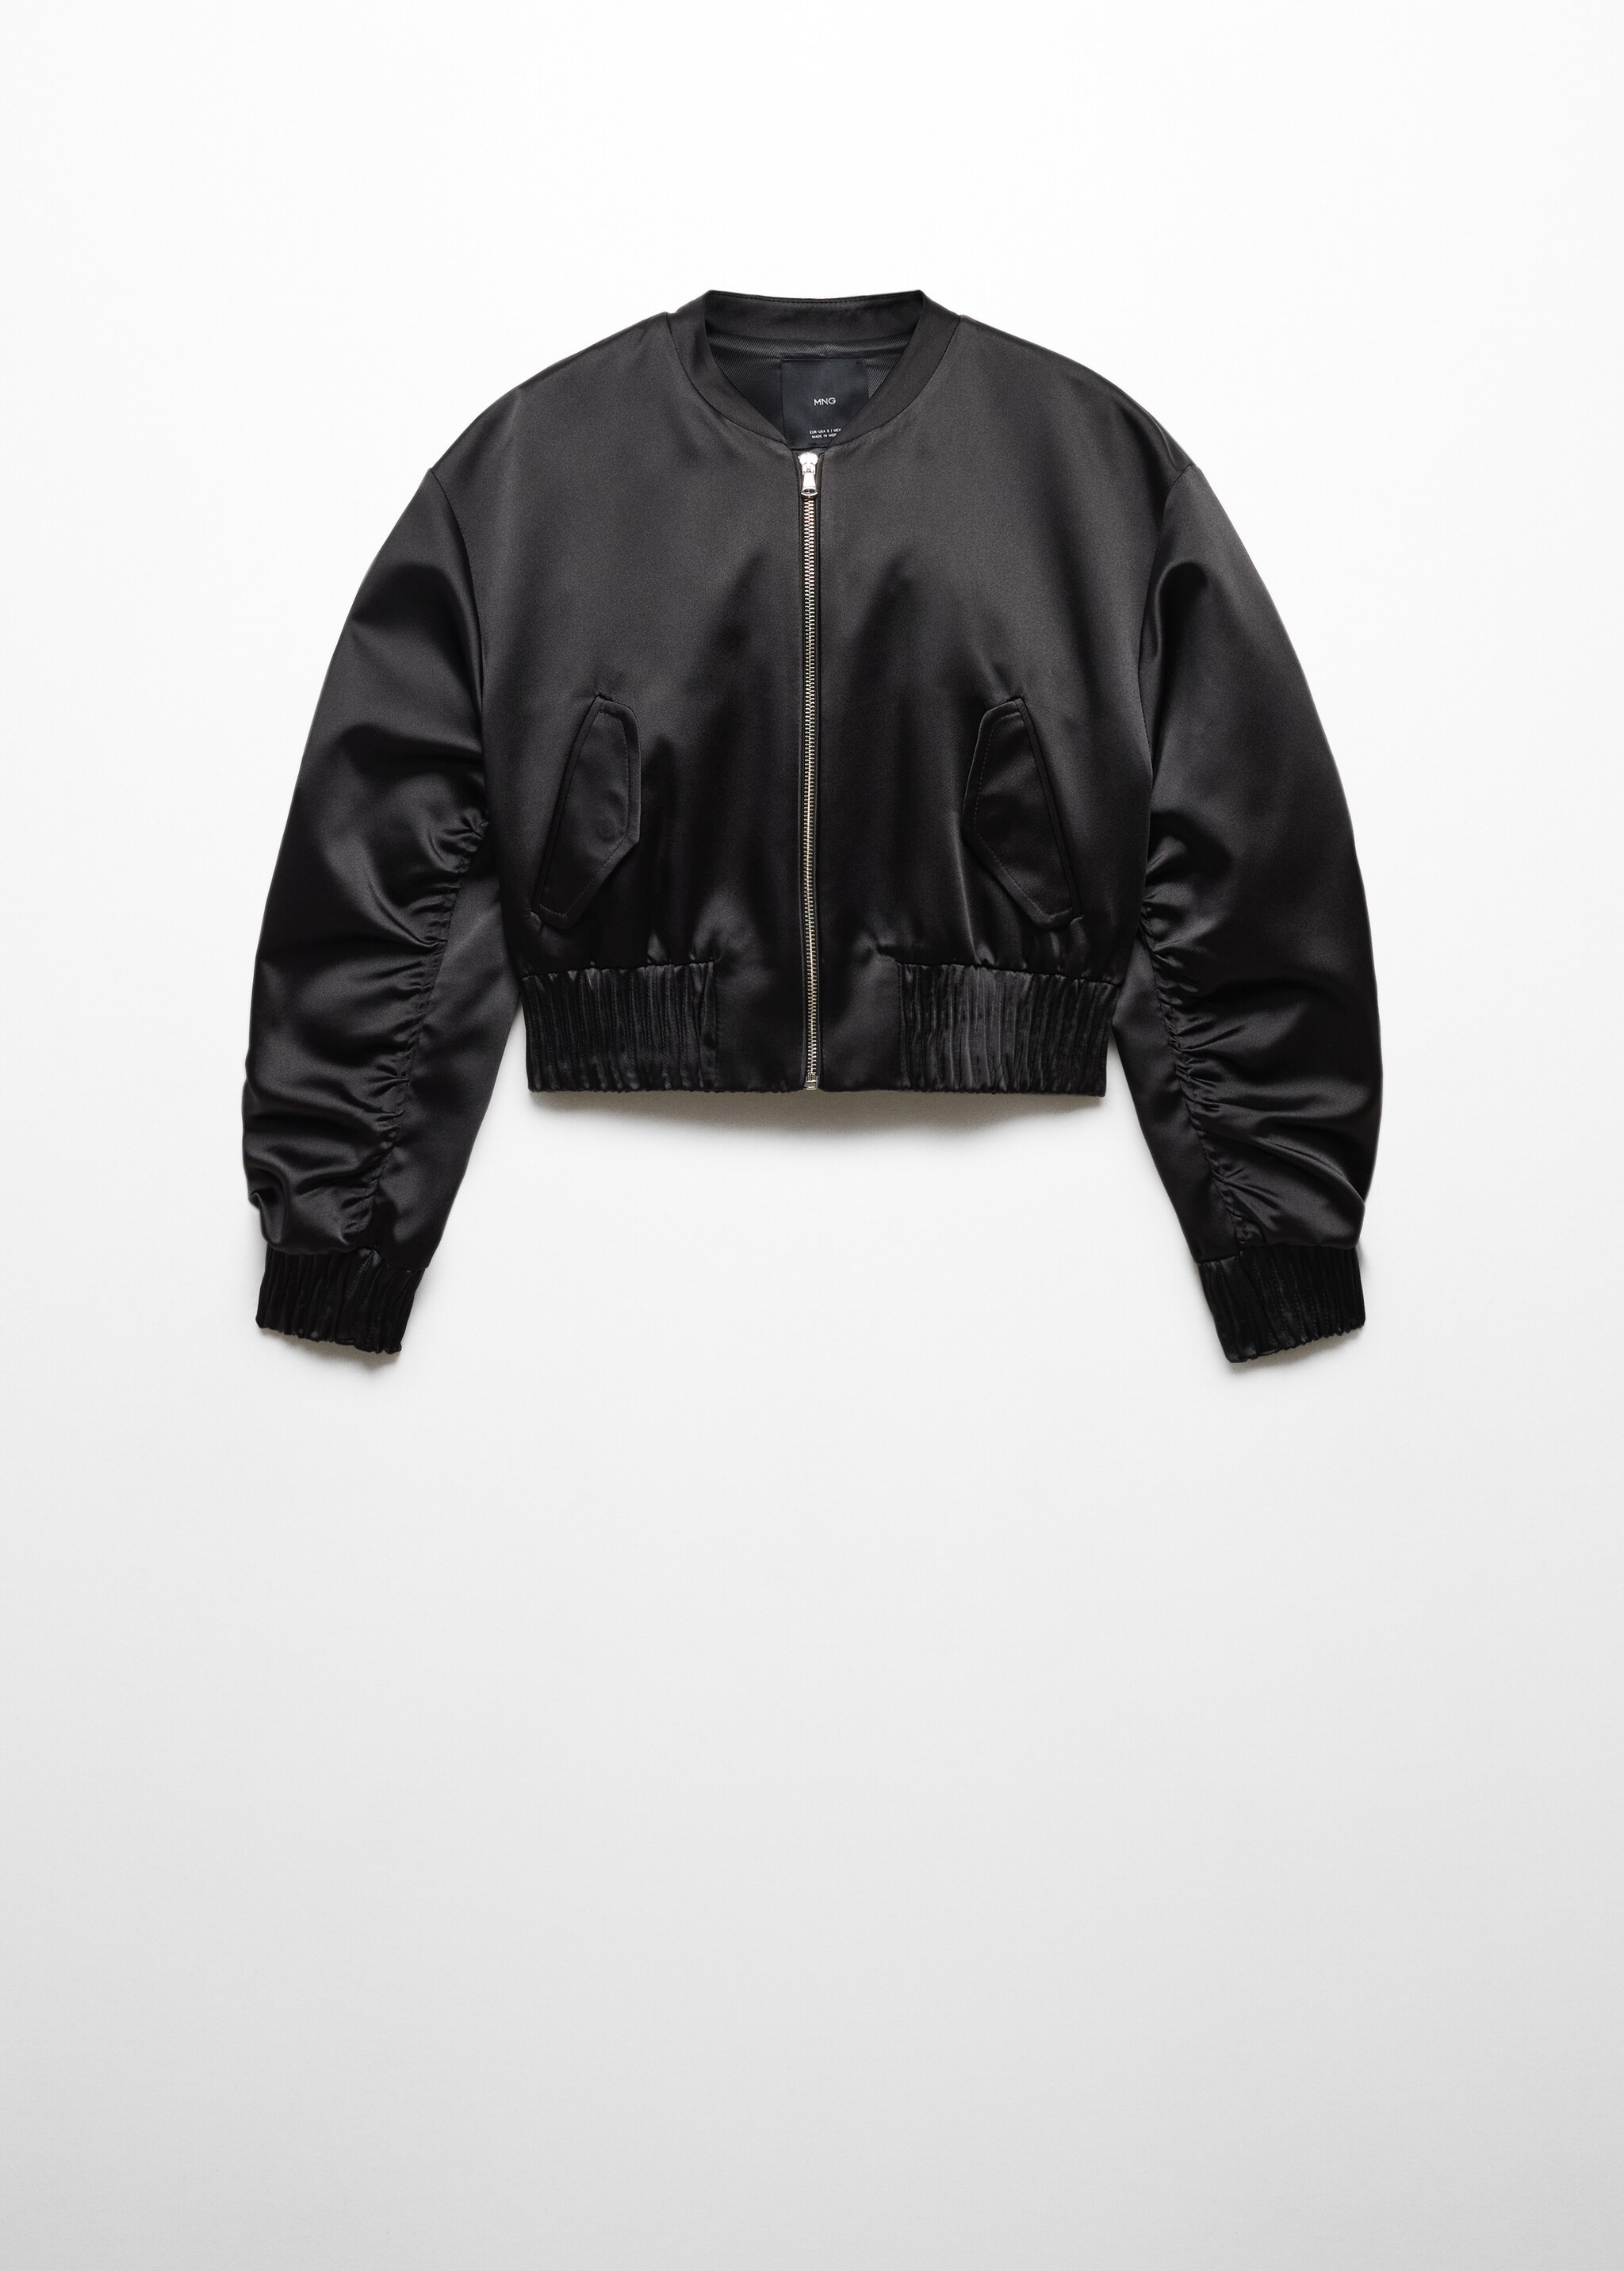 Crop satin bomber jacket - Article without model